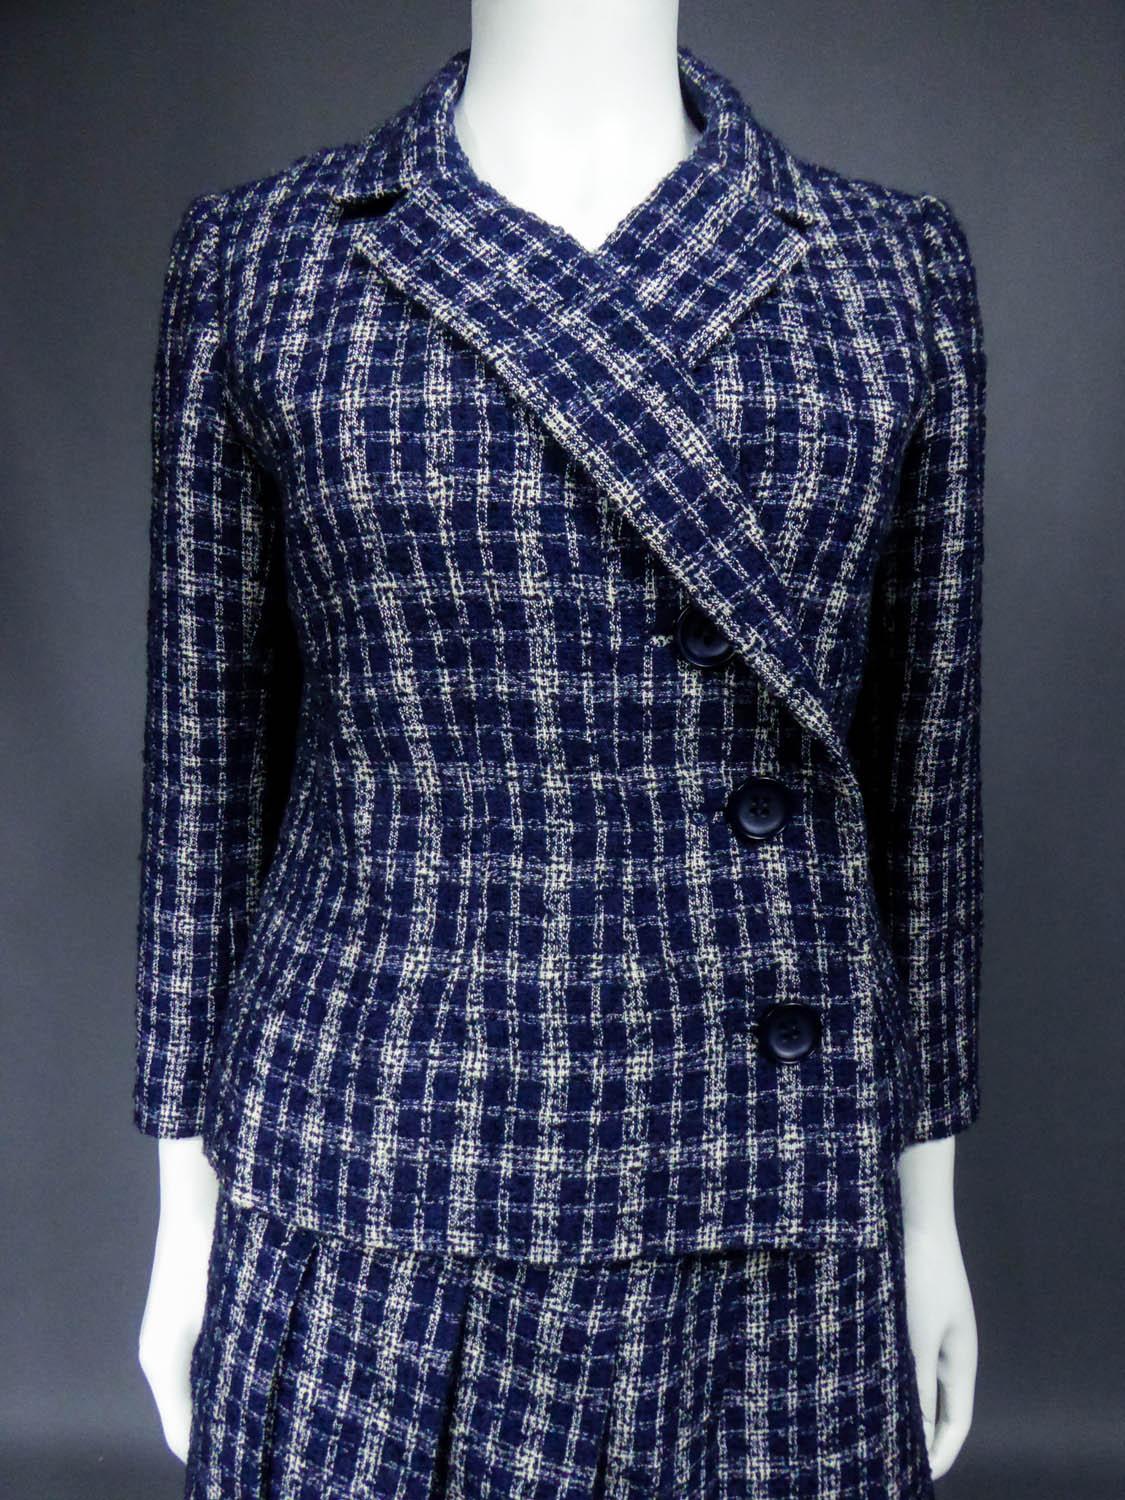 Circa 1962/1965
France

Skirt suit set, Demi Couture Christian Dior / Marc Bohan designer house for Berenice in Marseille from the years 1962/1965. Skirt suit in checked white and navy blue bouclé wool. Slightly fitted and flared jacket on the hips